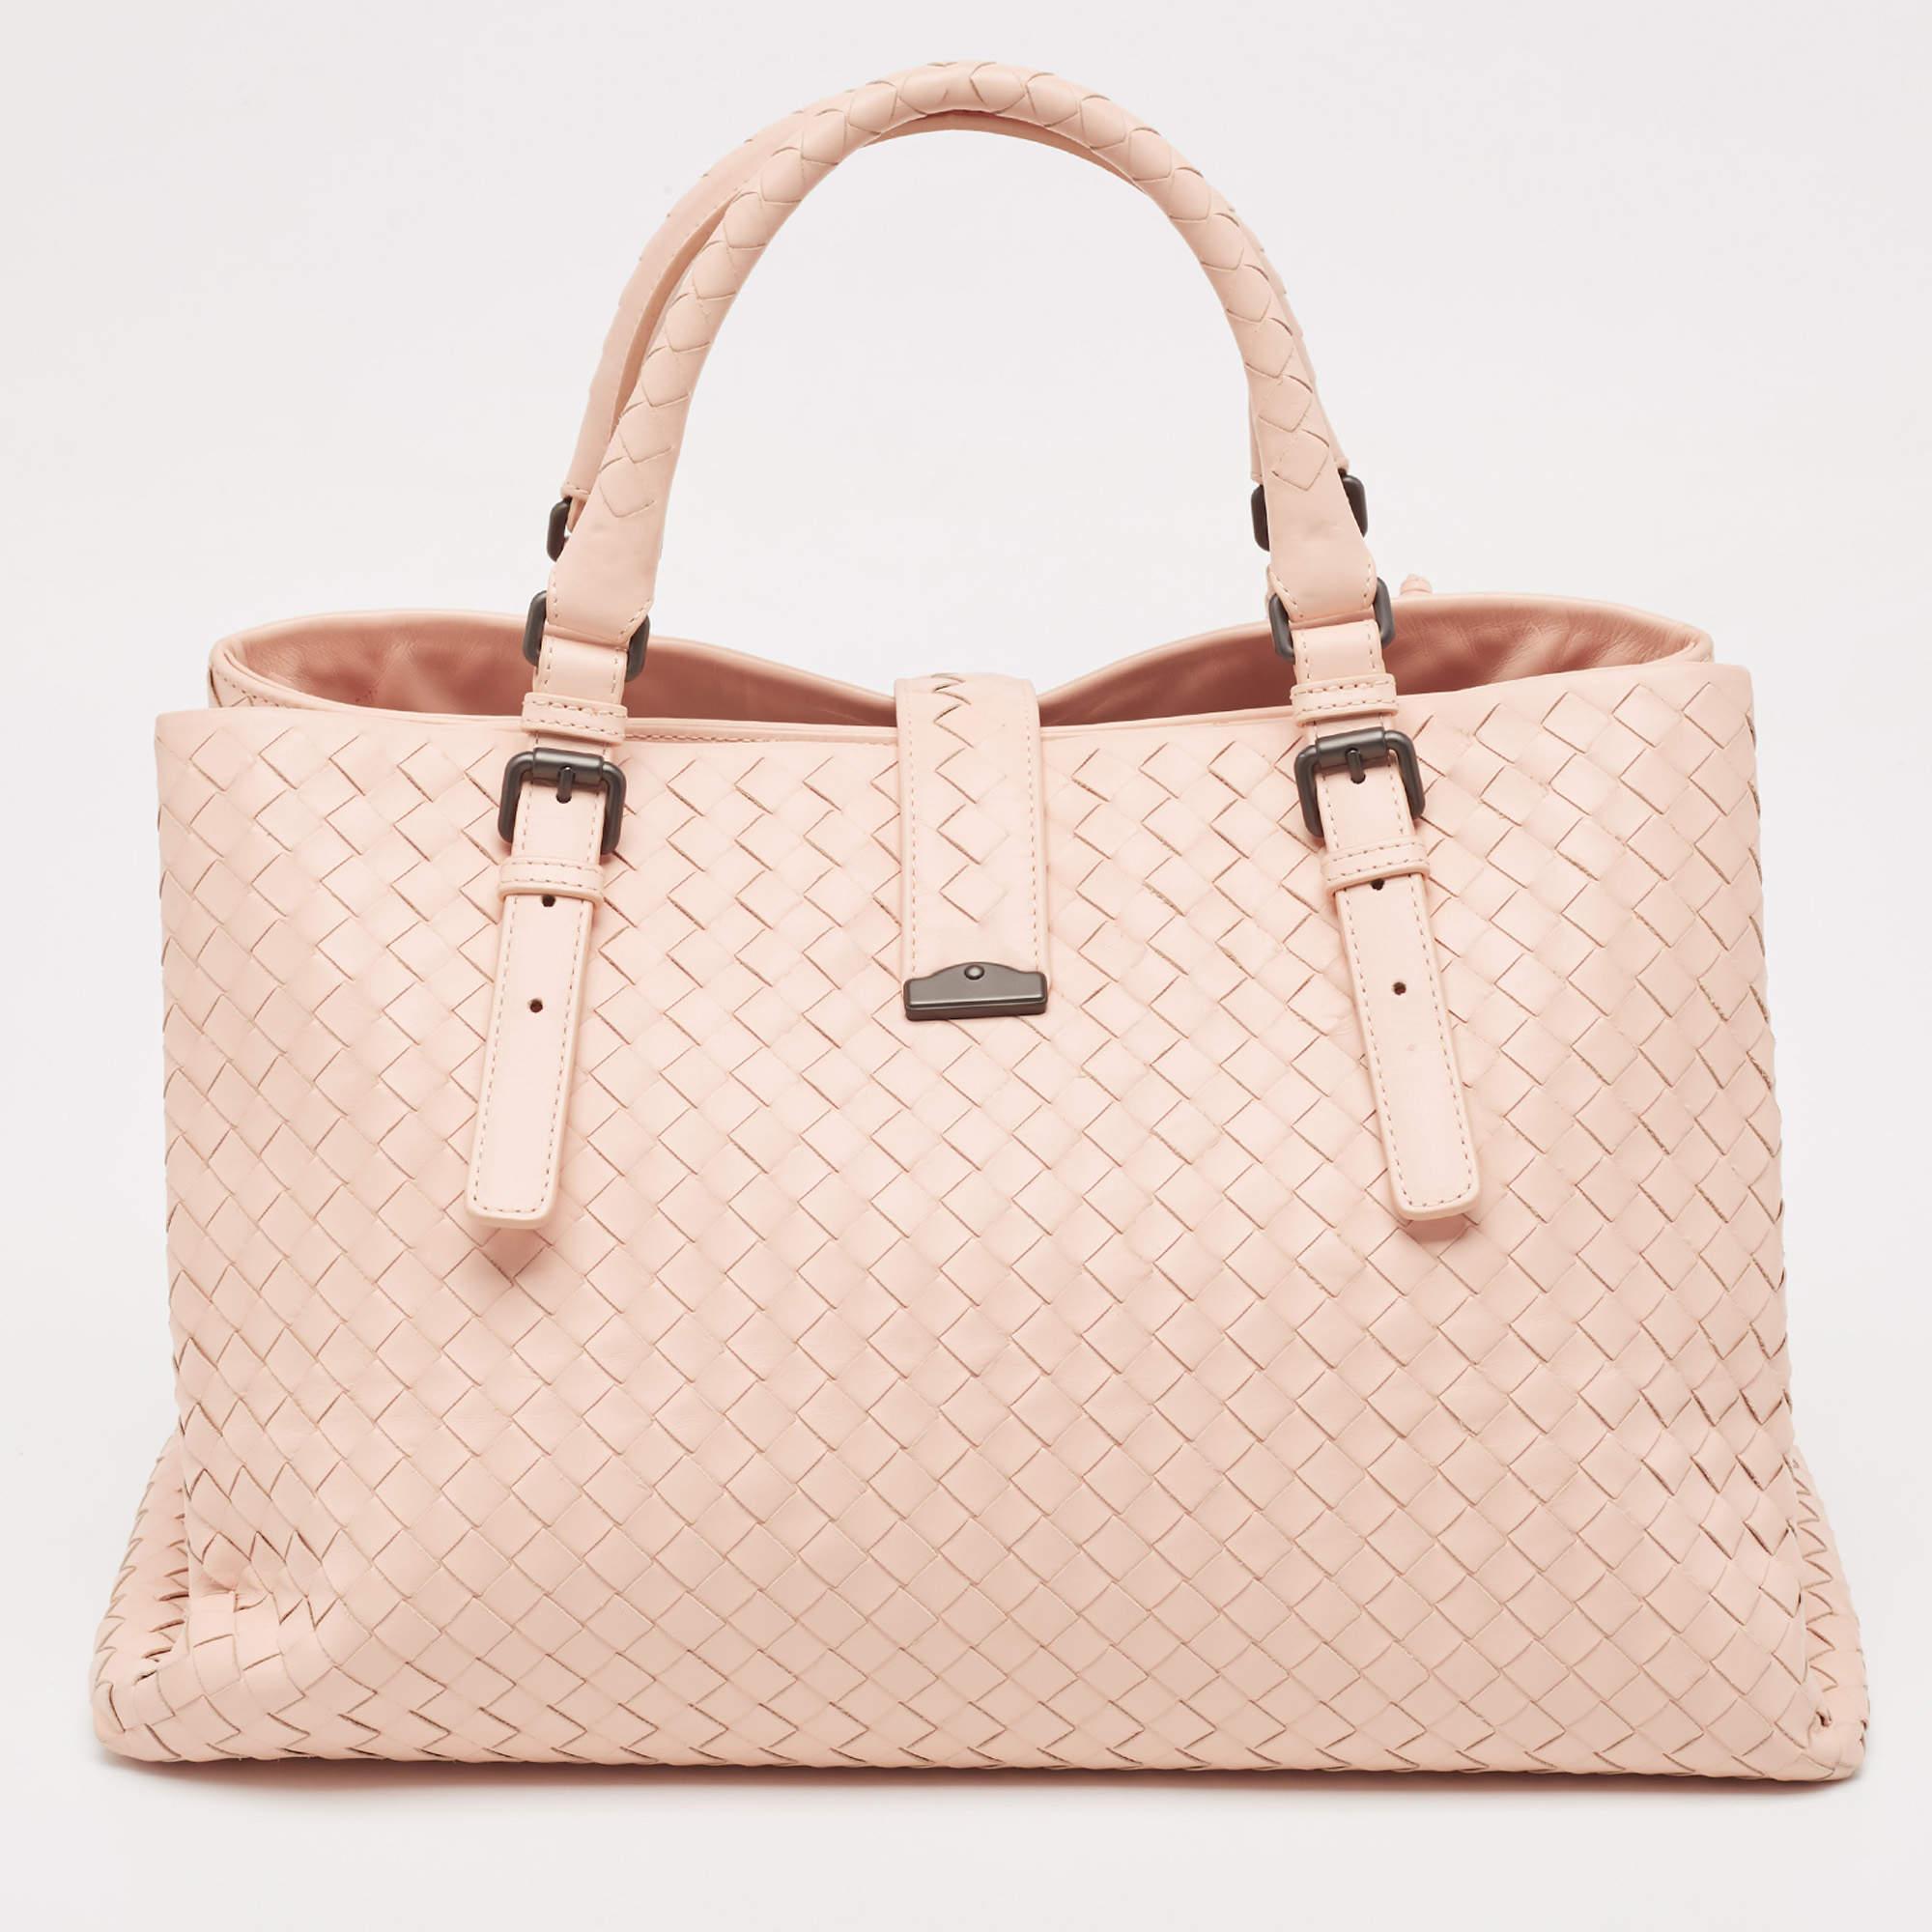 This Bottega Veneta tote is a creation that brings joy to one's sight! It has been beautifully crafted from leather in the signature Intrecciato weave with two handles on top. The bag is also equipped with a flap push-lock which secures Alcantara